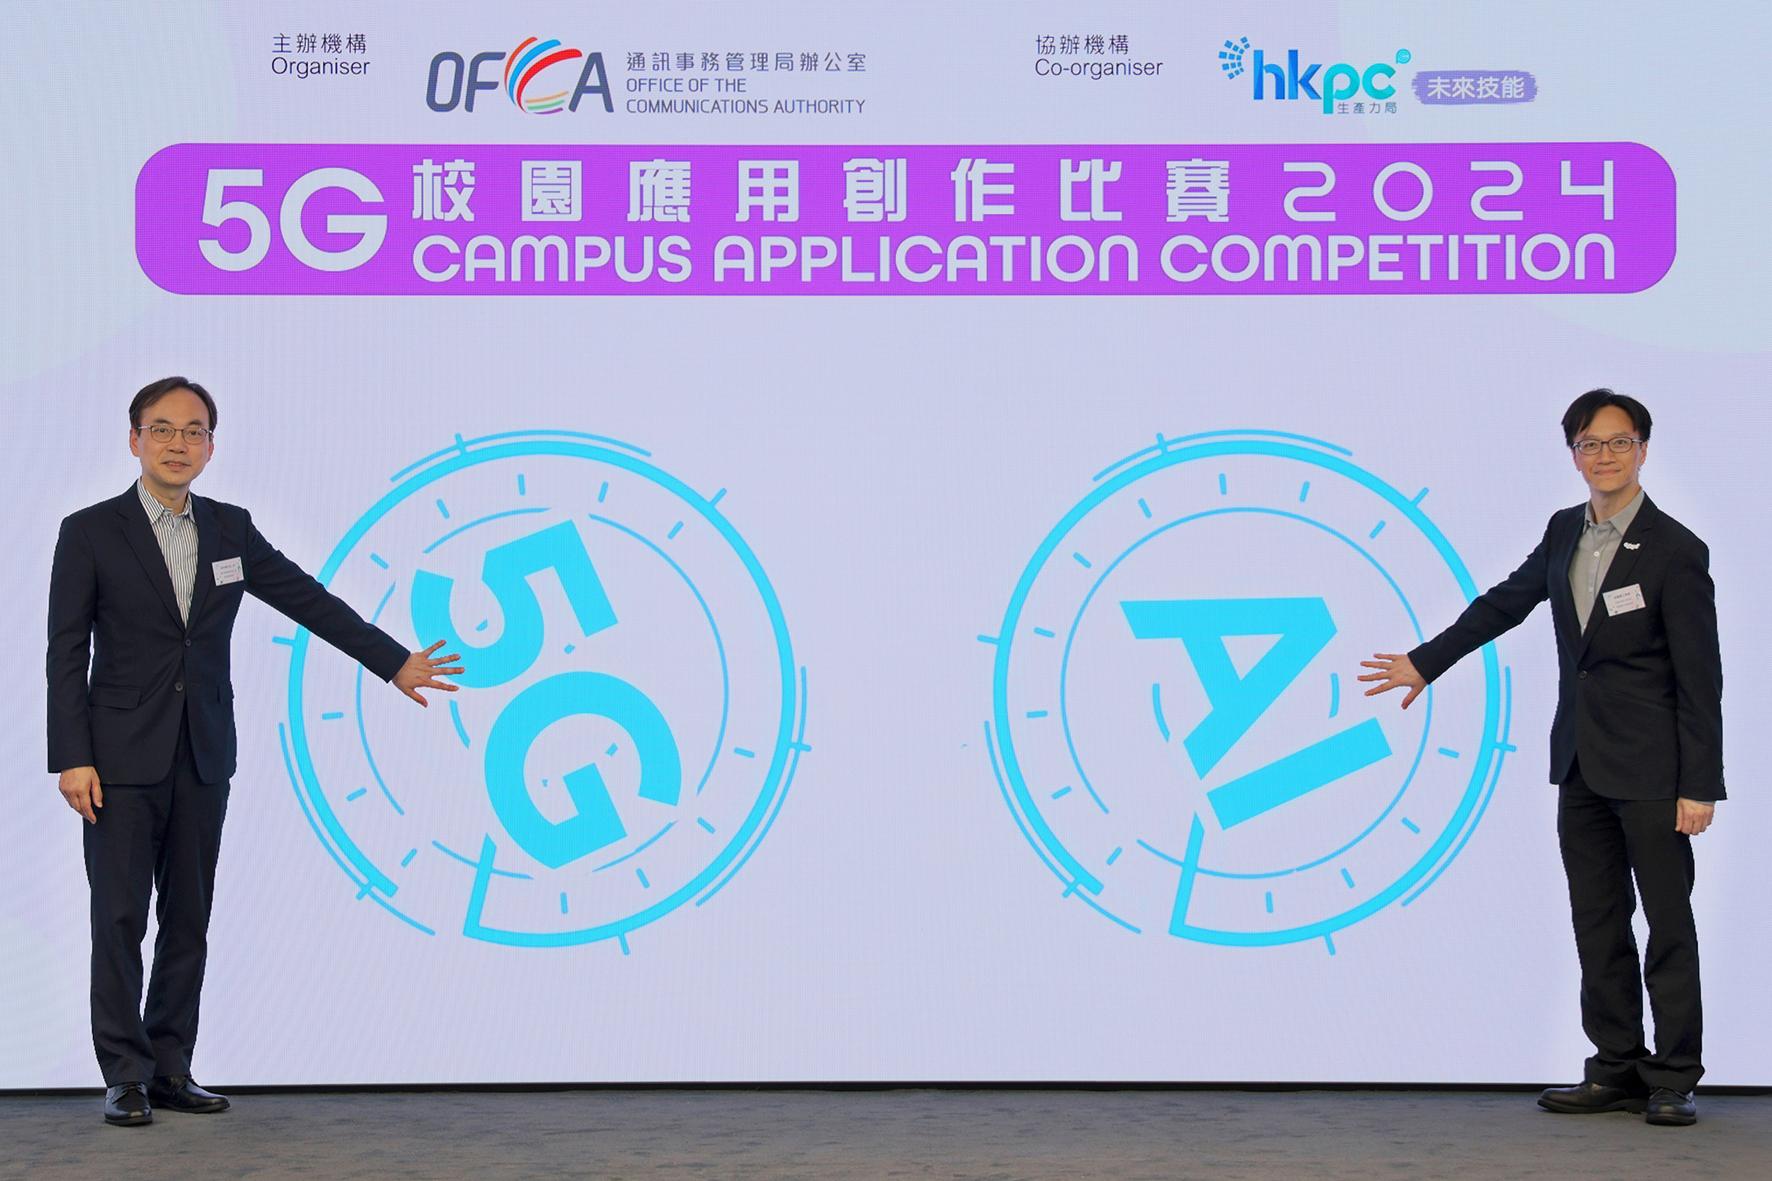 The Office of the Communications Authority held the Kick-off Ceremony cum Seminar of the second 5G Campus Application Competition today (May 18). Photo shows the Director-General of Communications, Mr Chaucer Leung (left), and the General Manager of the Smart City Division of the Hong Kong Productivity Council, Mr Samson Suen (right), officiating at the launching ceremony.